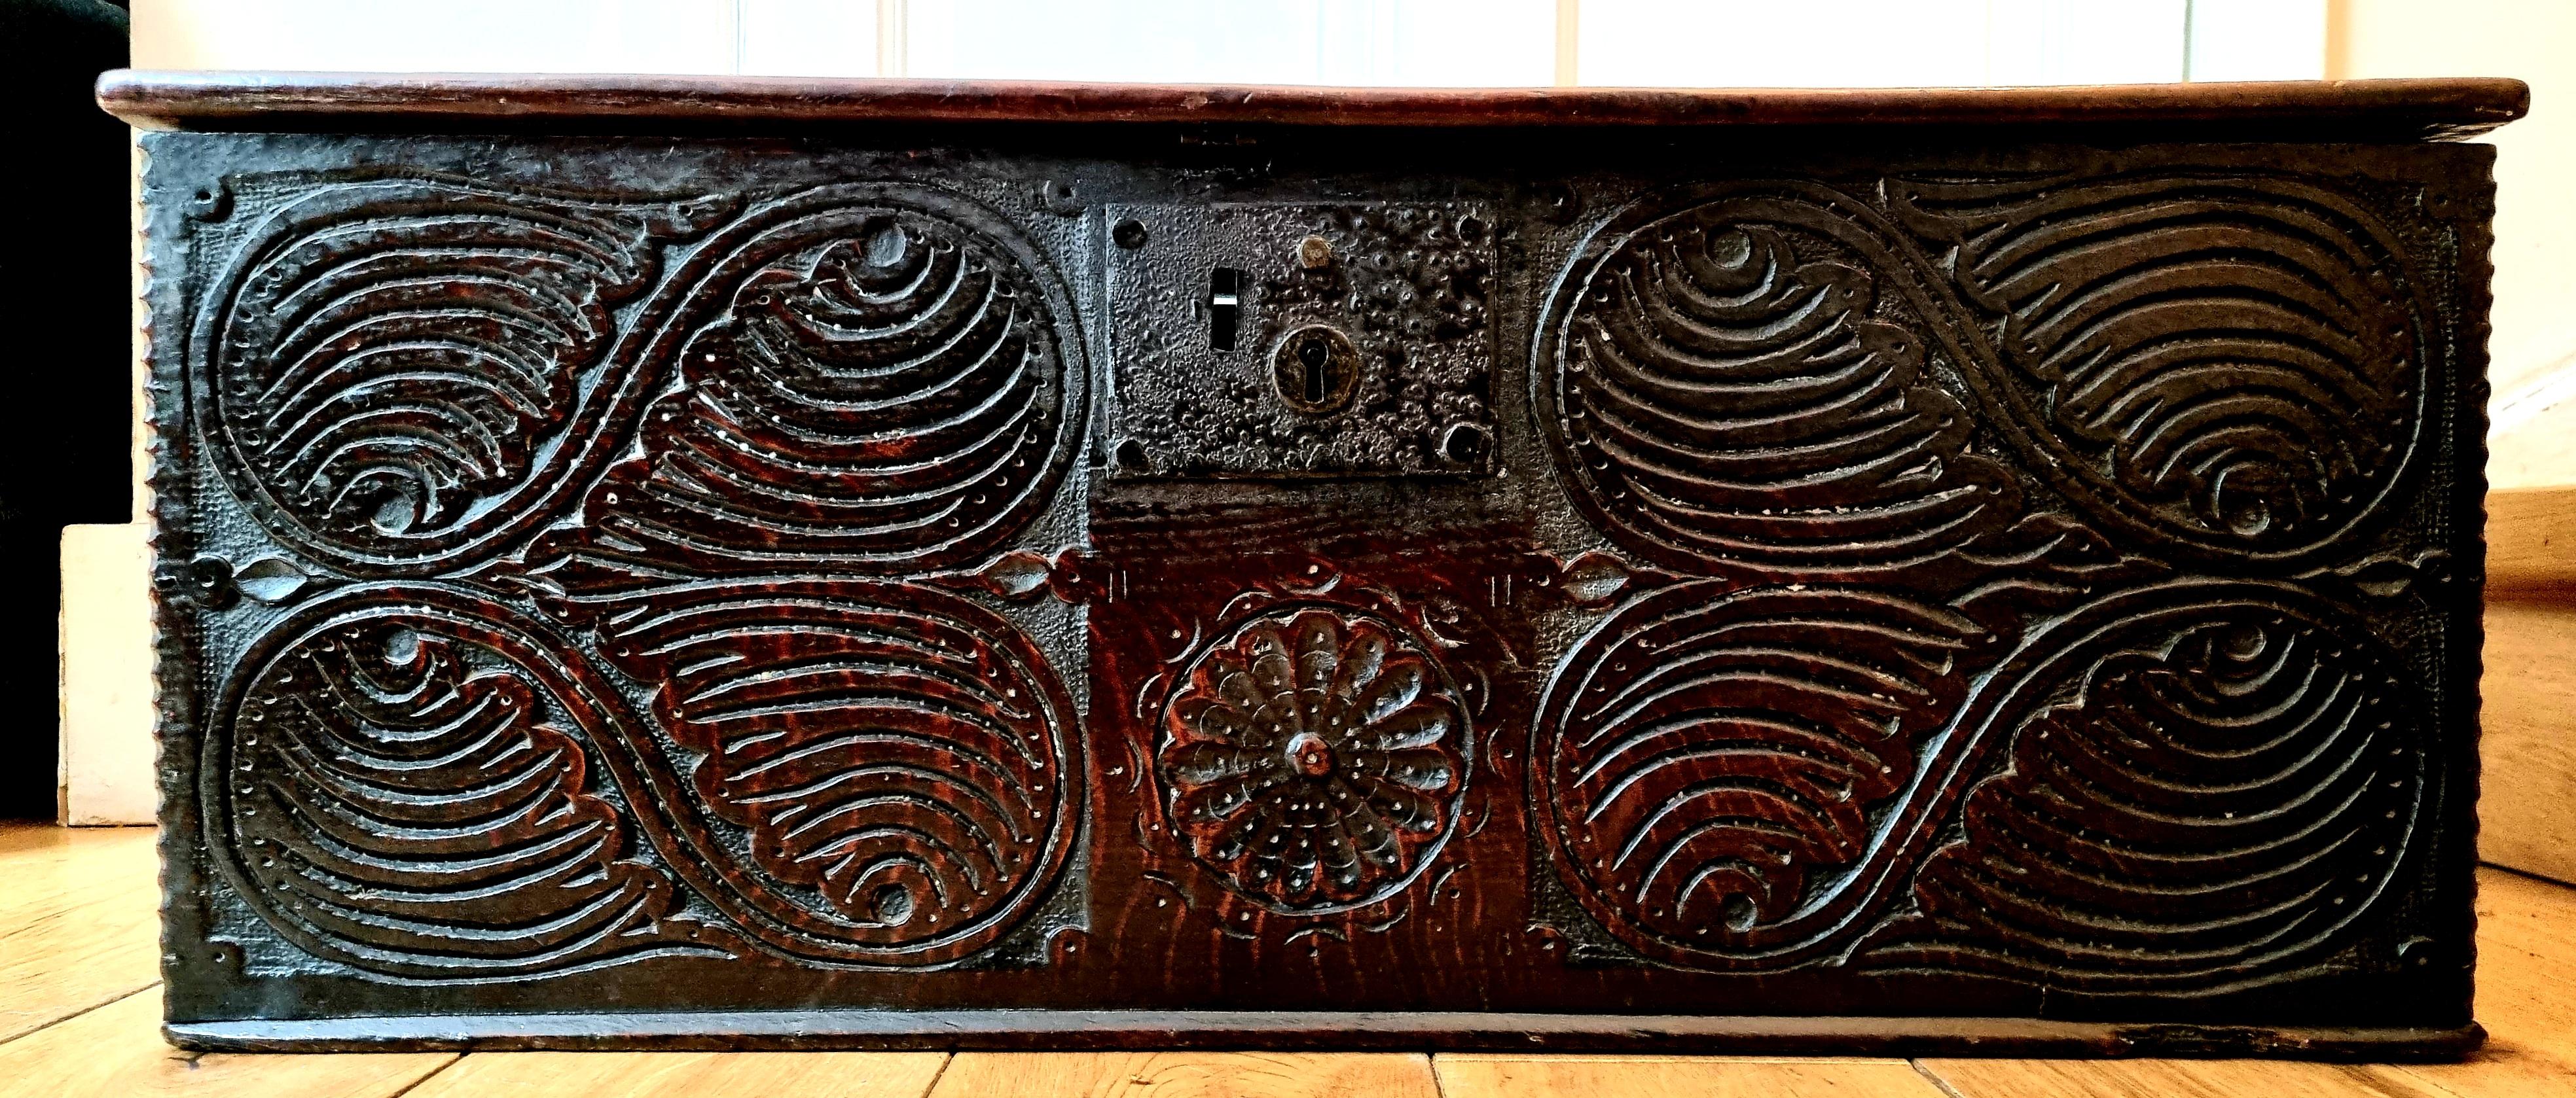  An exceptional fine 17th Century small chest / document box retaining its original iron work. A beautiful and original deep patina that has build up over the past 300 years with a dry original interior surface. The front of the chest is intricately